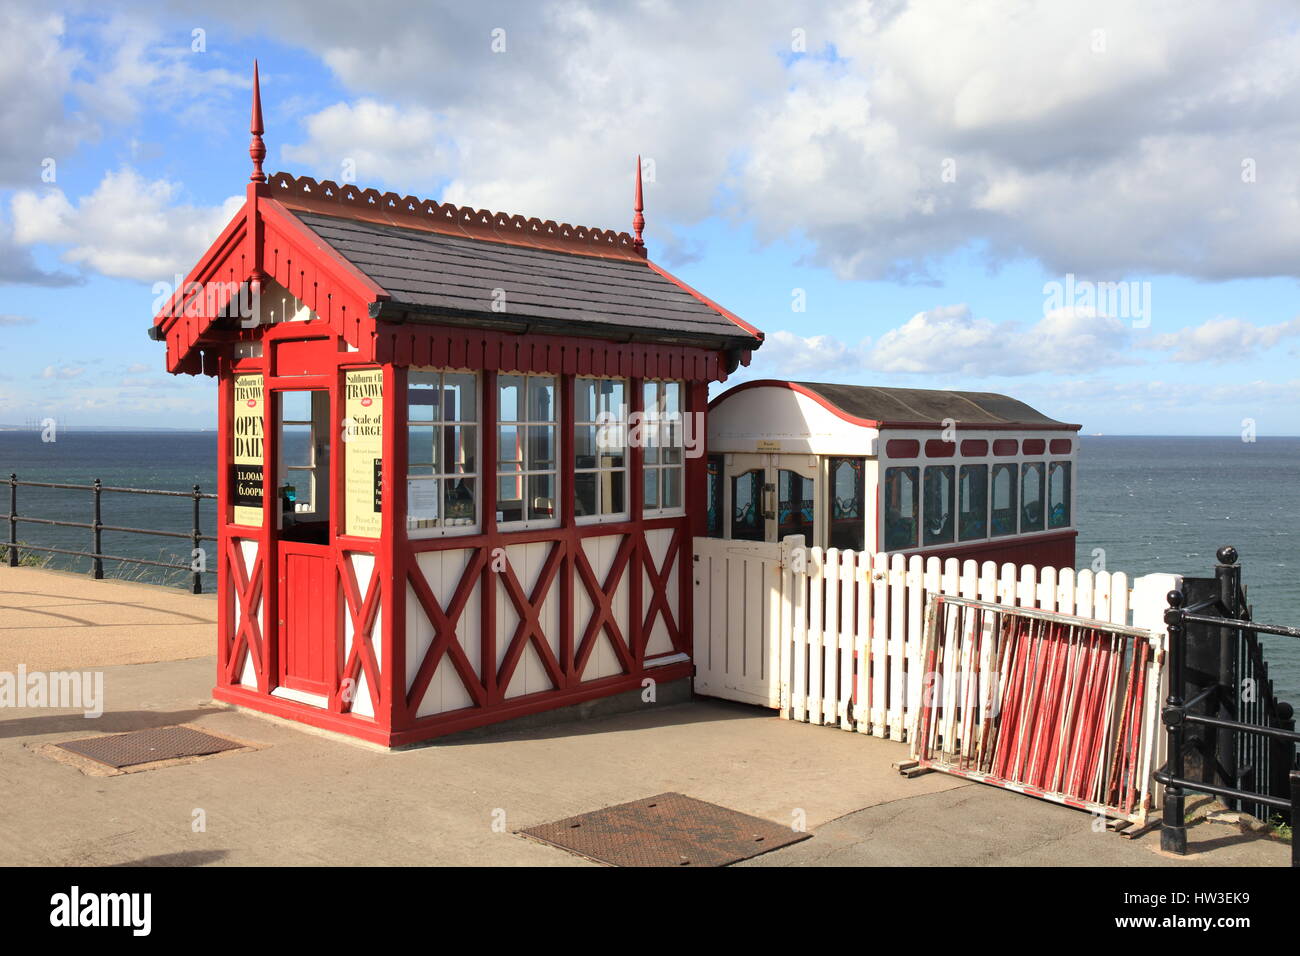 Victorian Cliff Lift, Saltburn-by-the-Sea, North Yorkshire, England Stock Photo